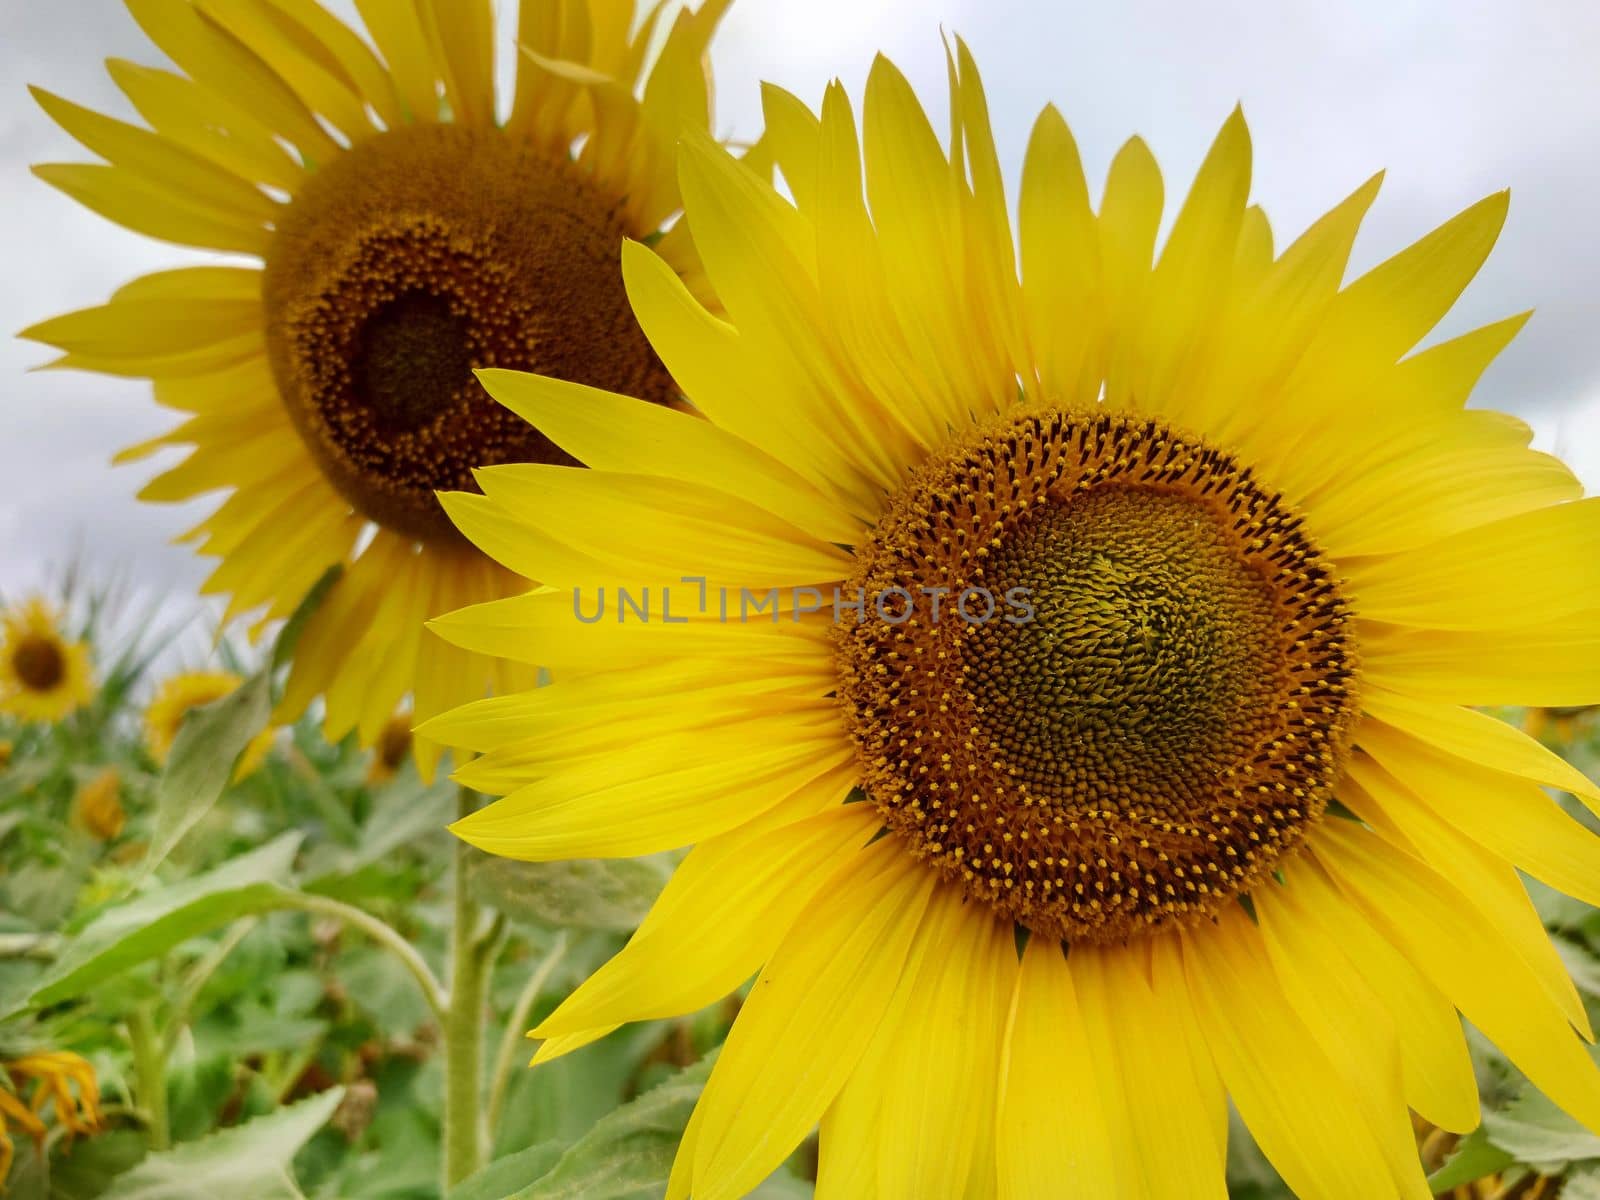 Two yellow sunflowers in full bloom on a cloudy day by Mastak80